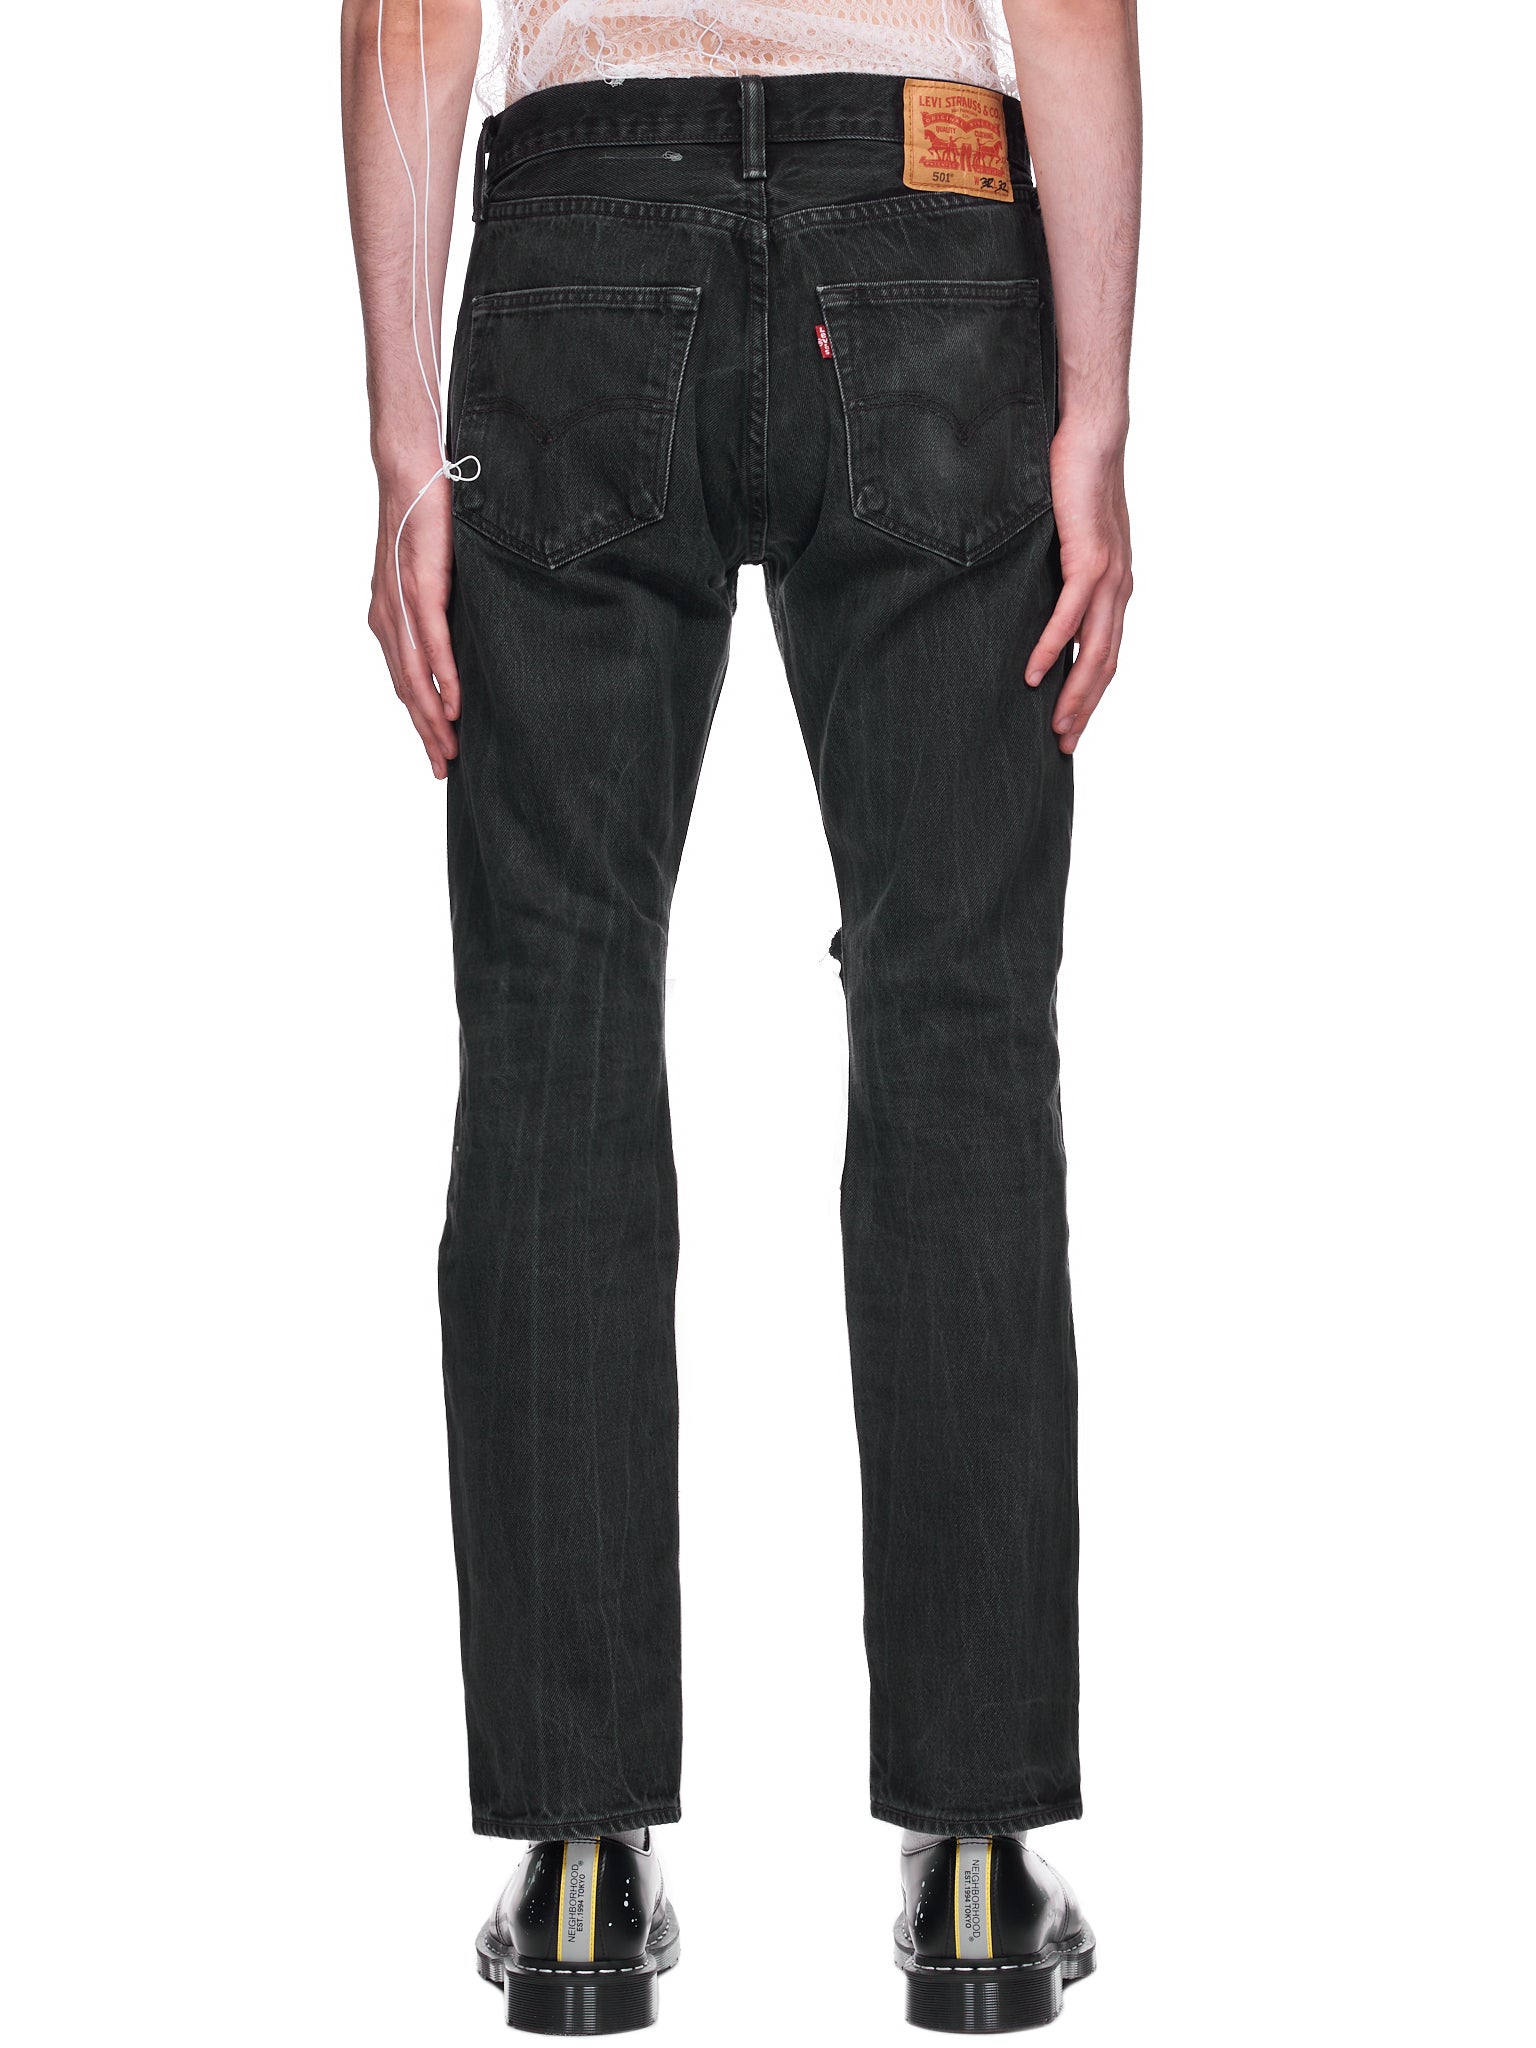 BCO Black Jeans with Patches 30